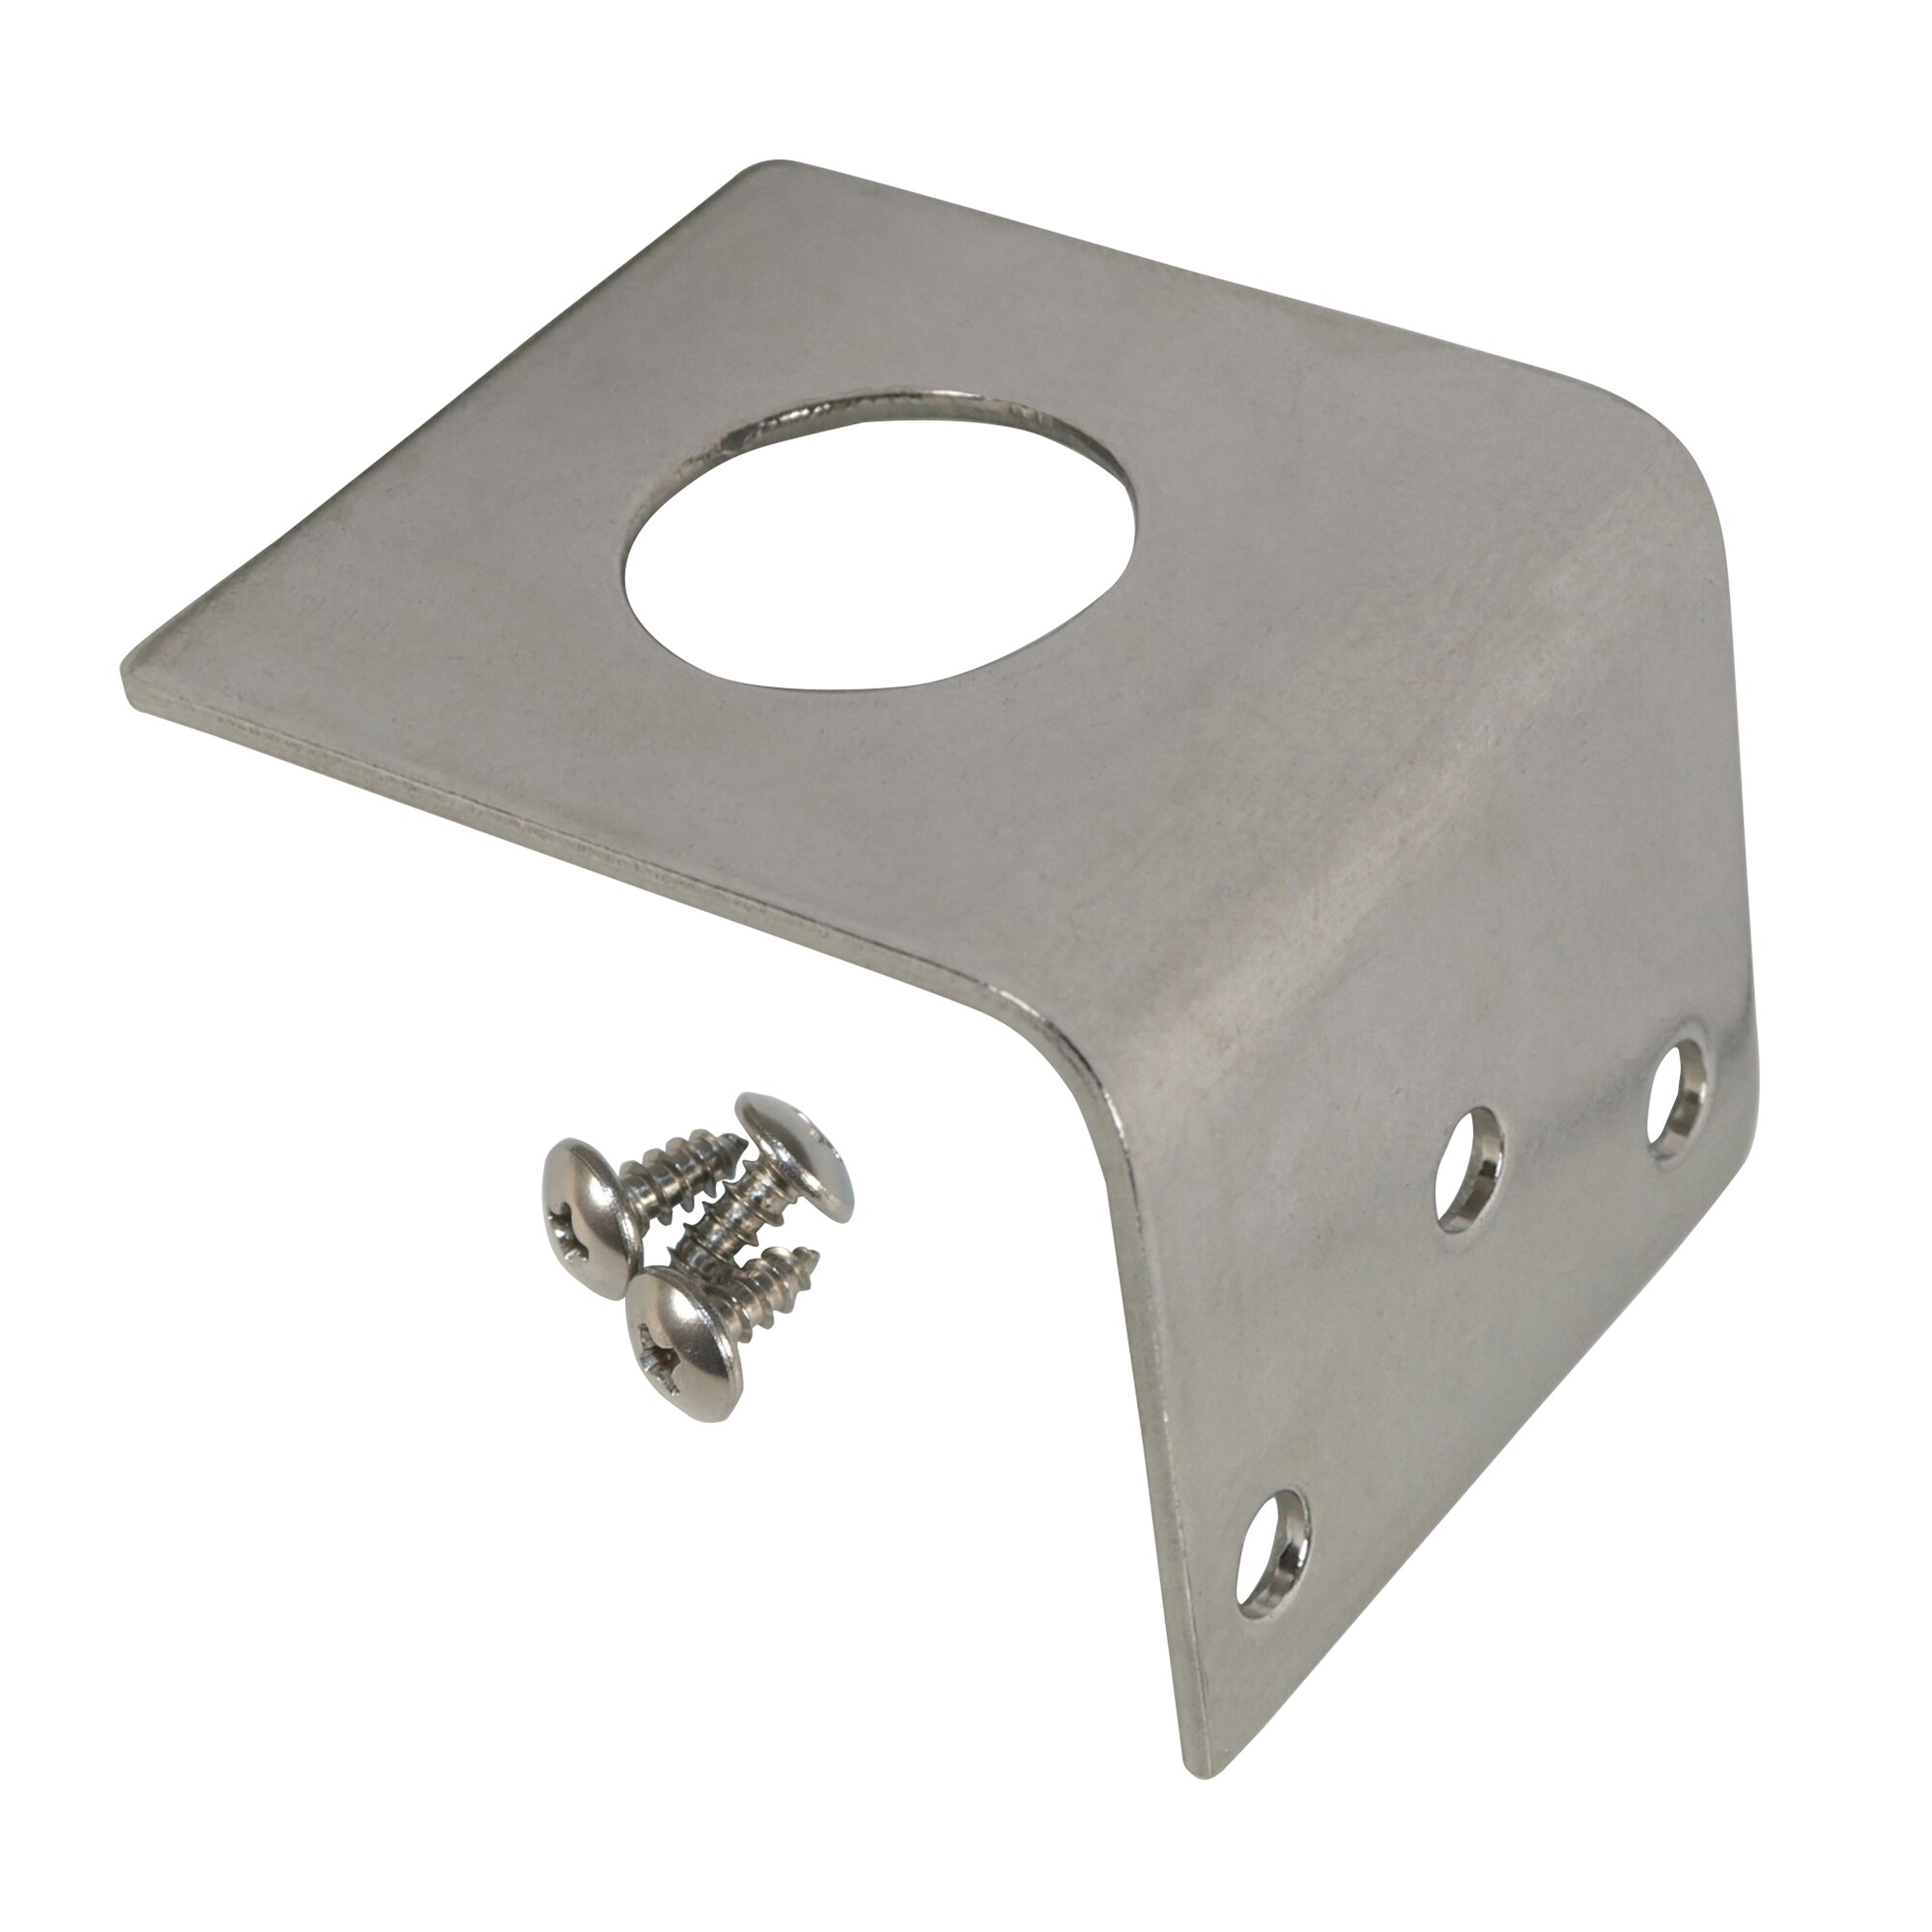 Browning Stainless Steel NMO Mount L-Bracket for Car Trunk or Fender Groove  - Includes Mounting Screws in the Mobile Audio department at